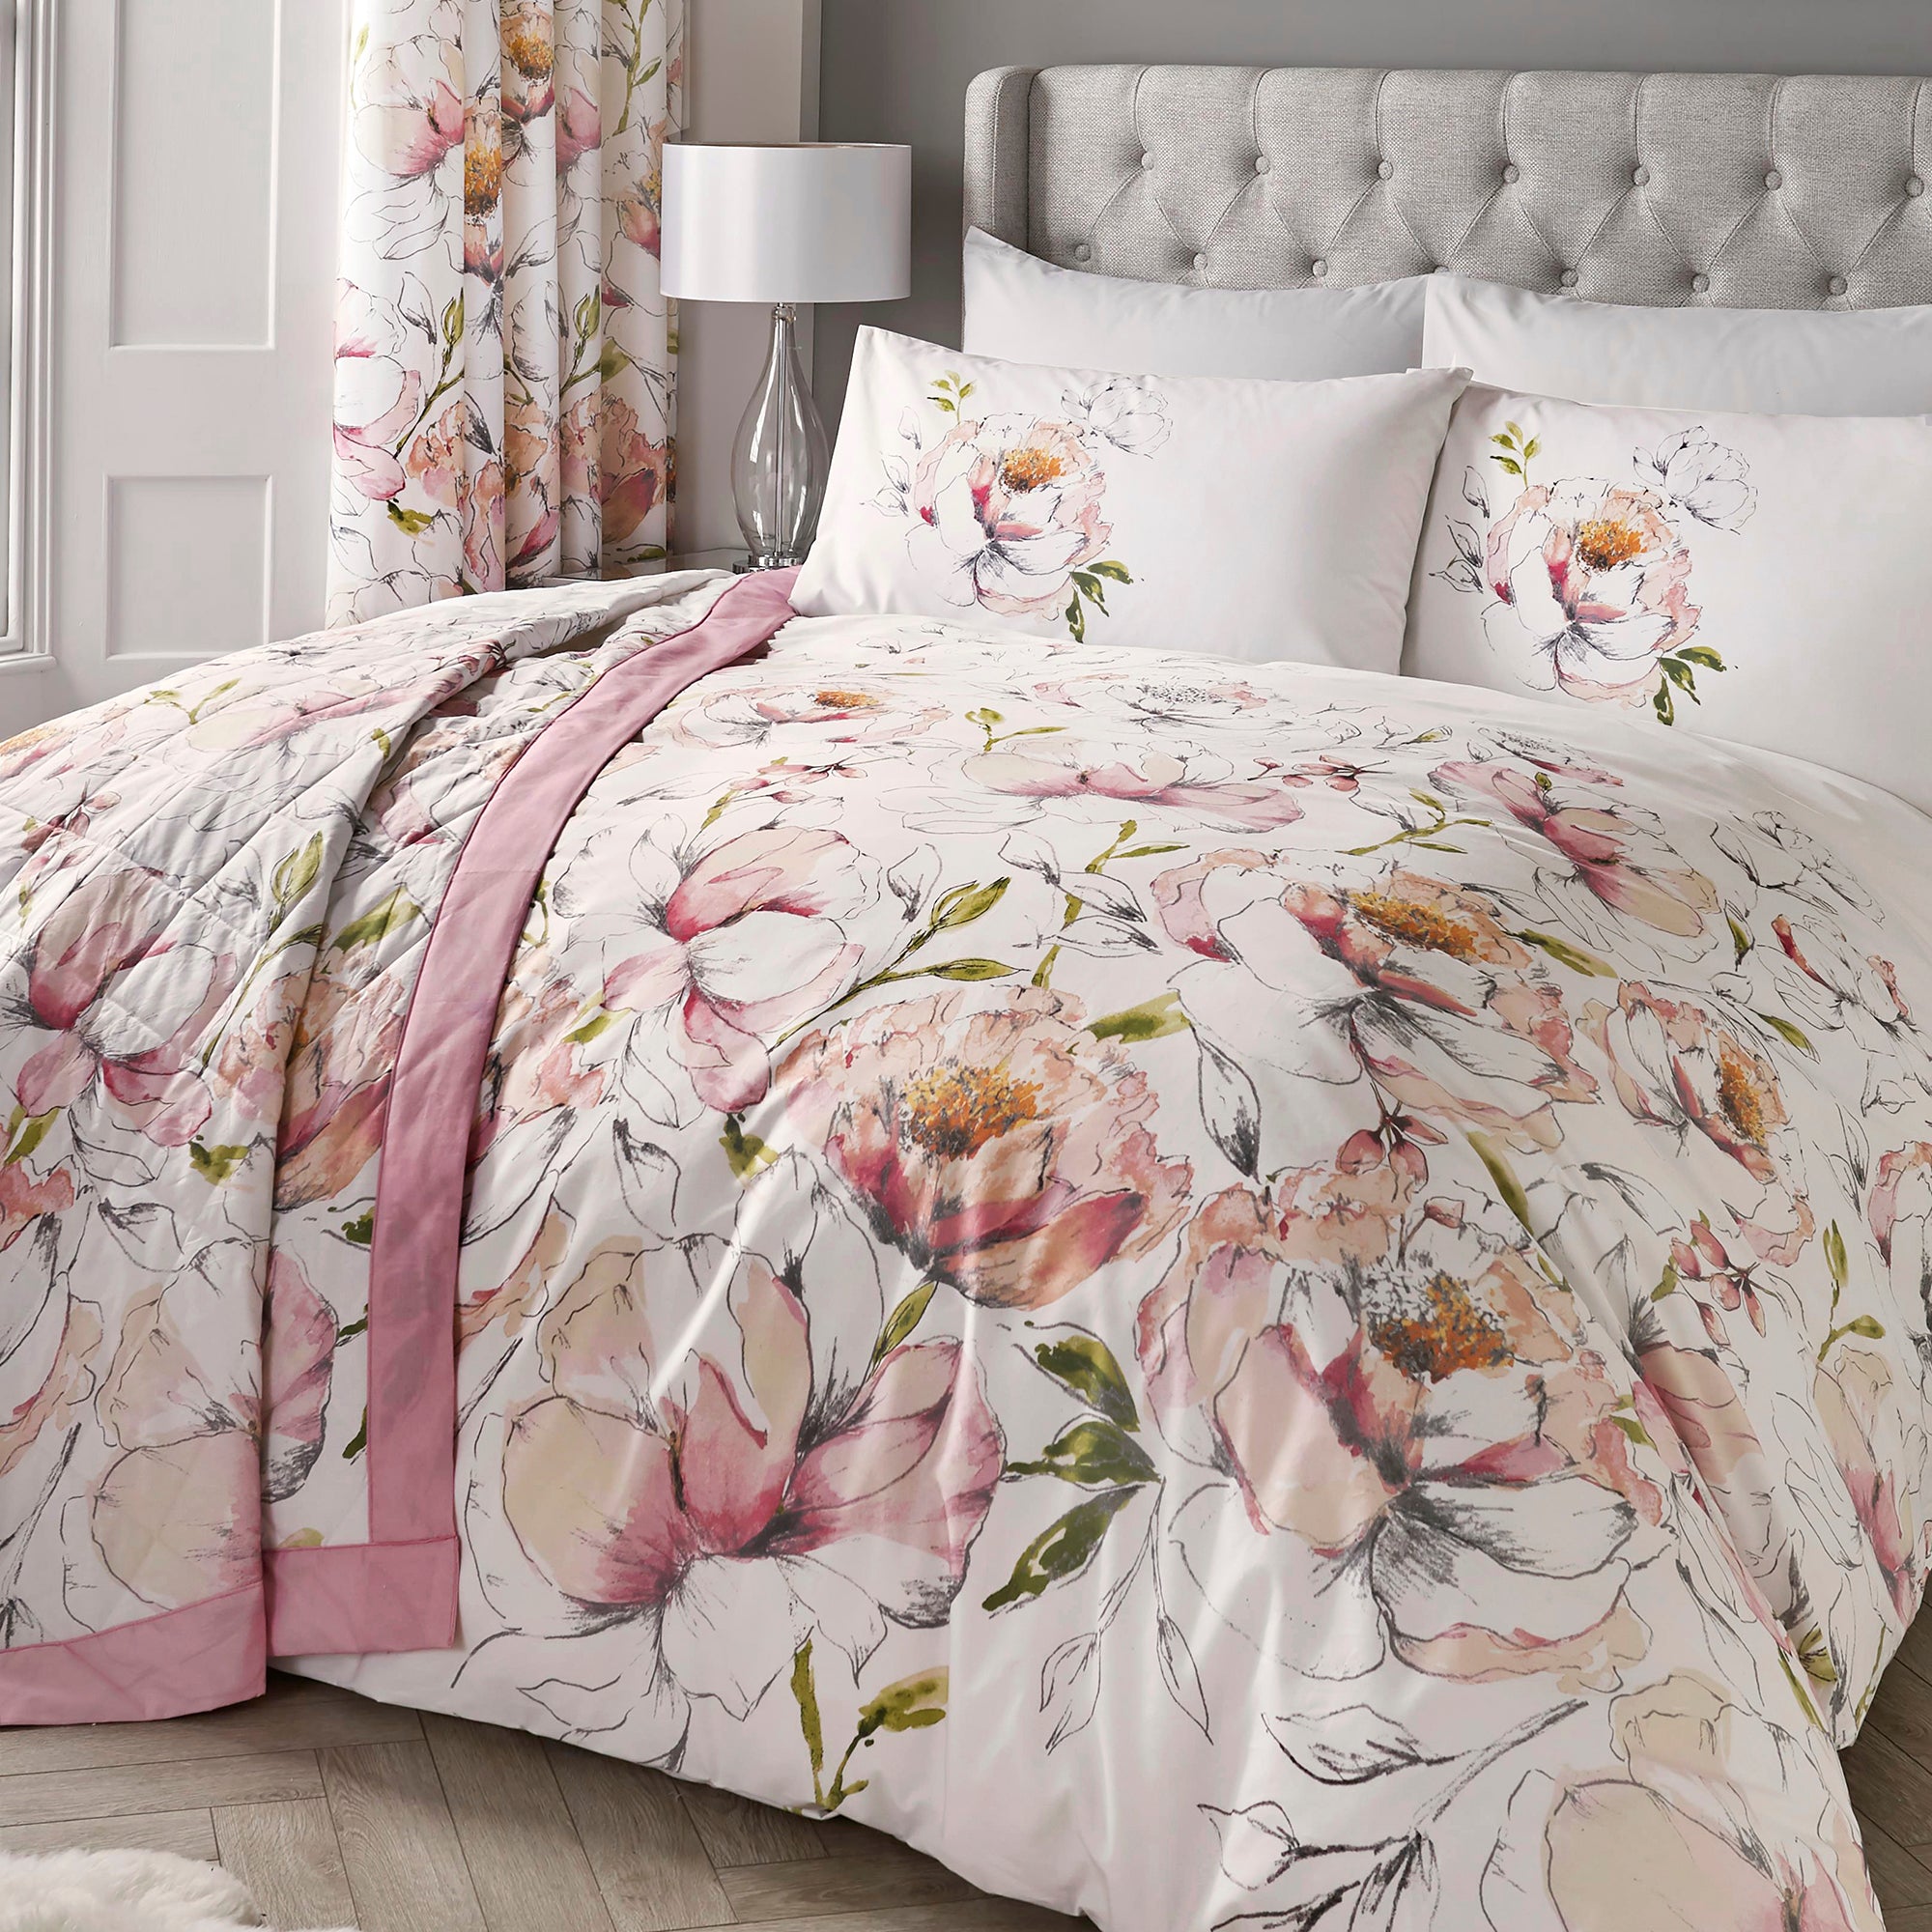 Peony - Easy Care Duvet Cover Set & Curtains in Pink - by D&D Design